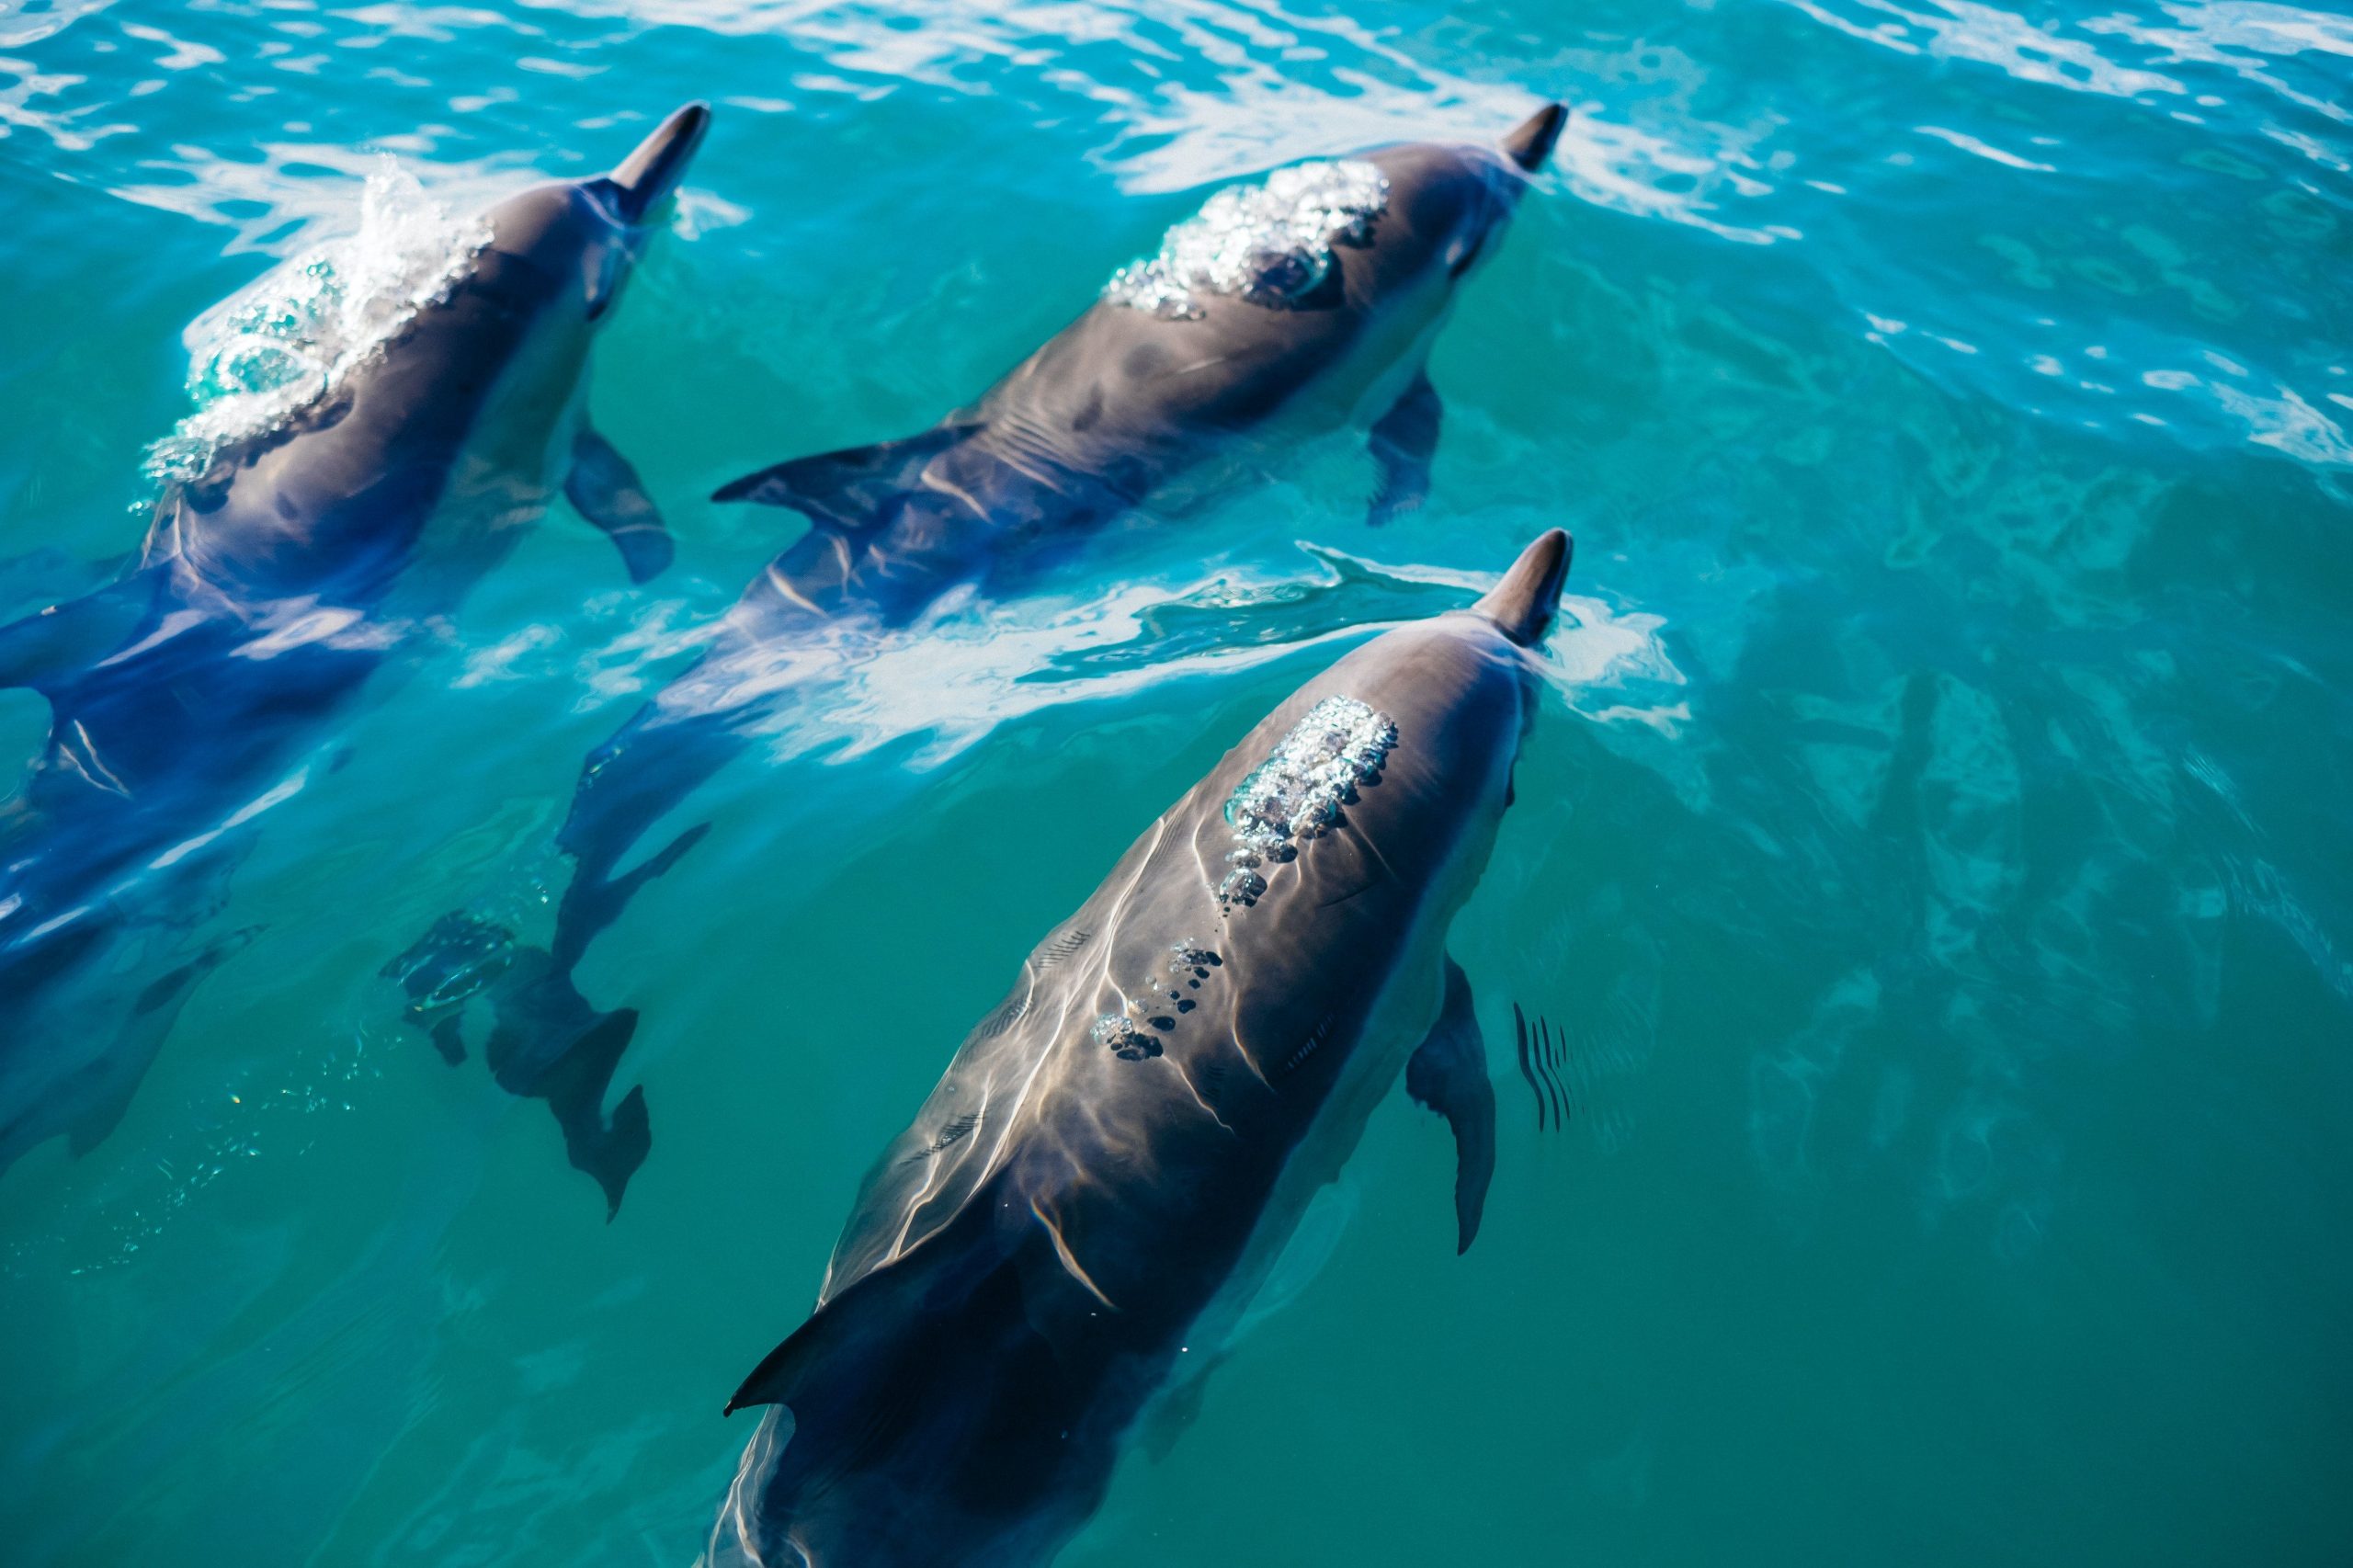 Massacre of nearly 1500 dolphins in the Faroe Islands sparks outrage